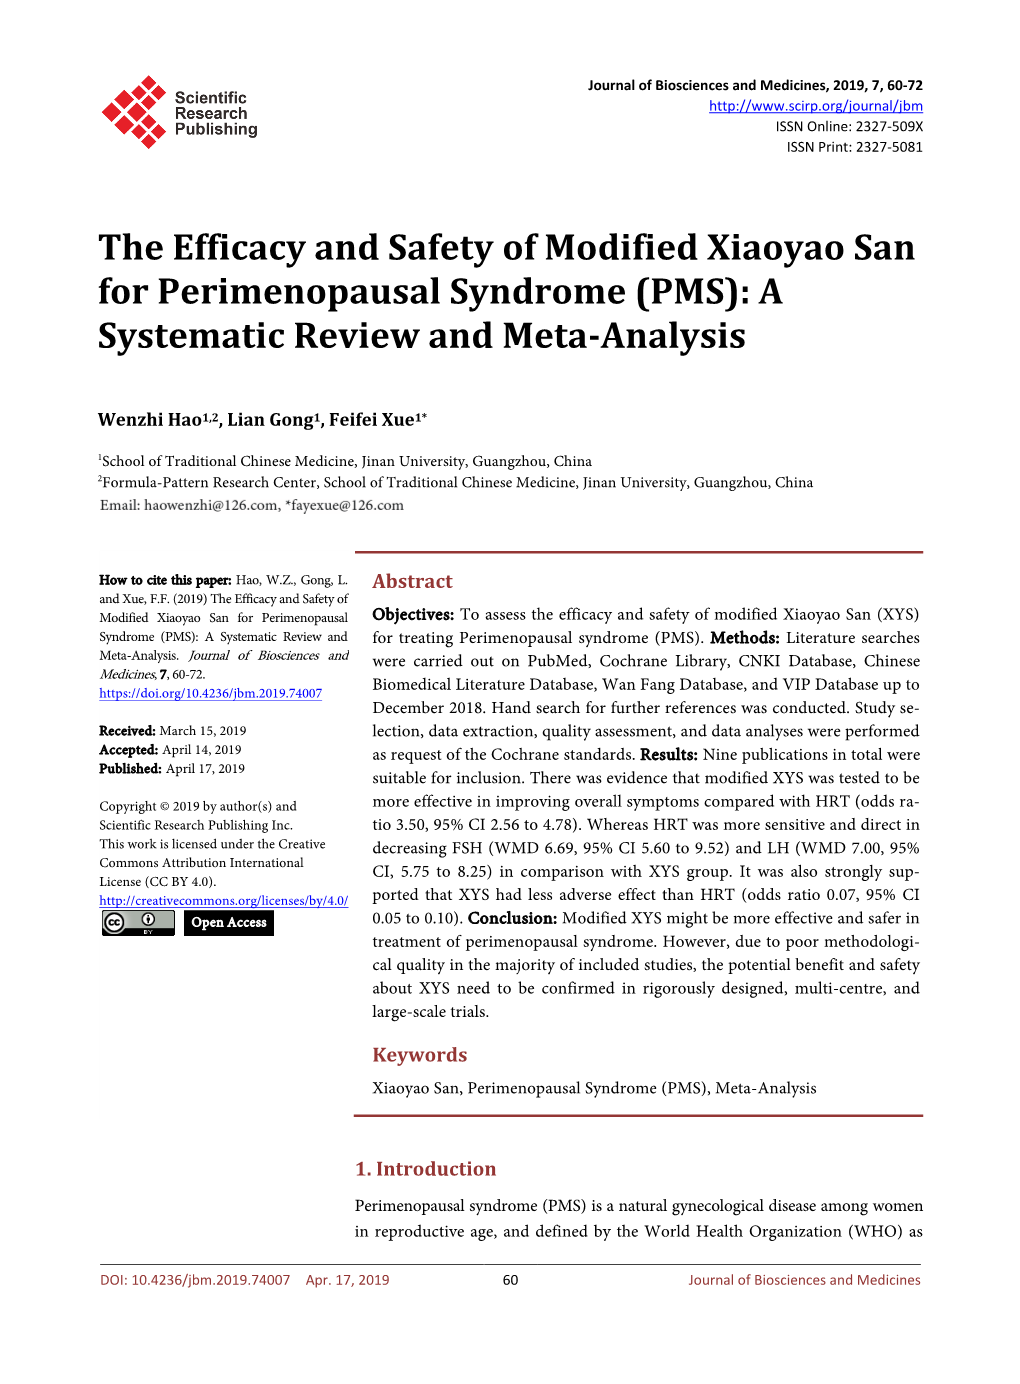 The Efficacy and Safety of Modified Xiaoyao San for Perimenopausal Syndrome (PMS): a Systematic Review and Meta-Analysis